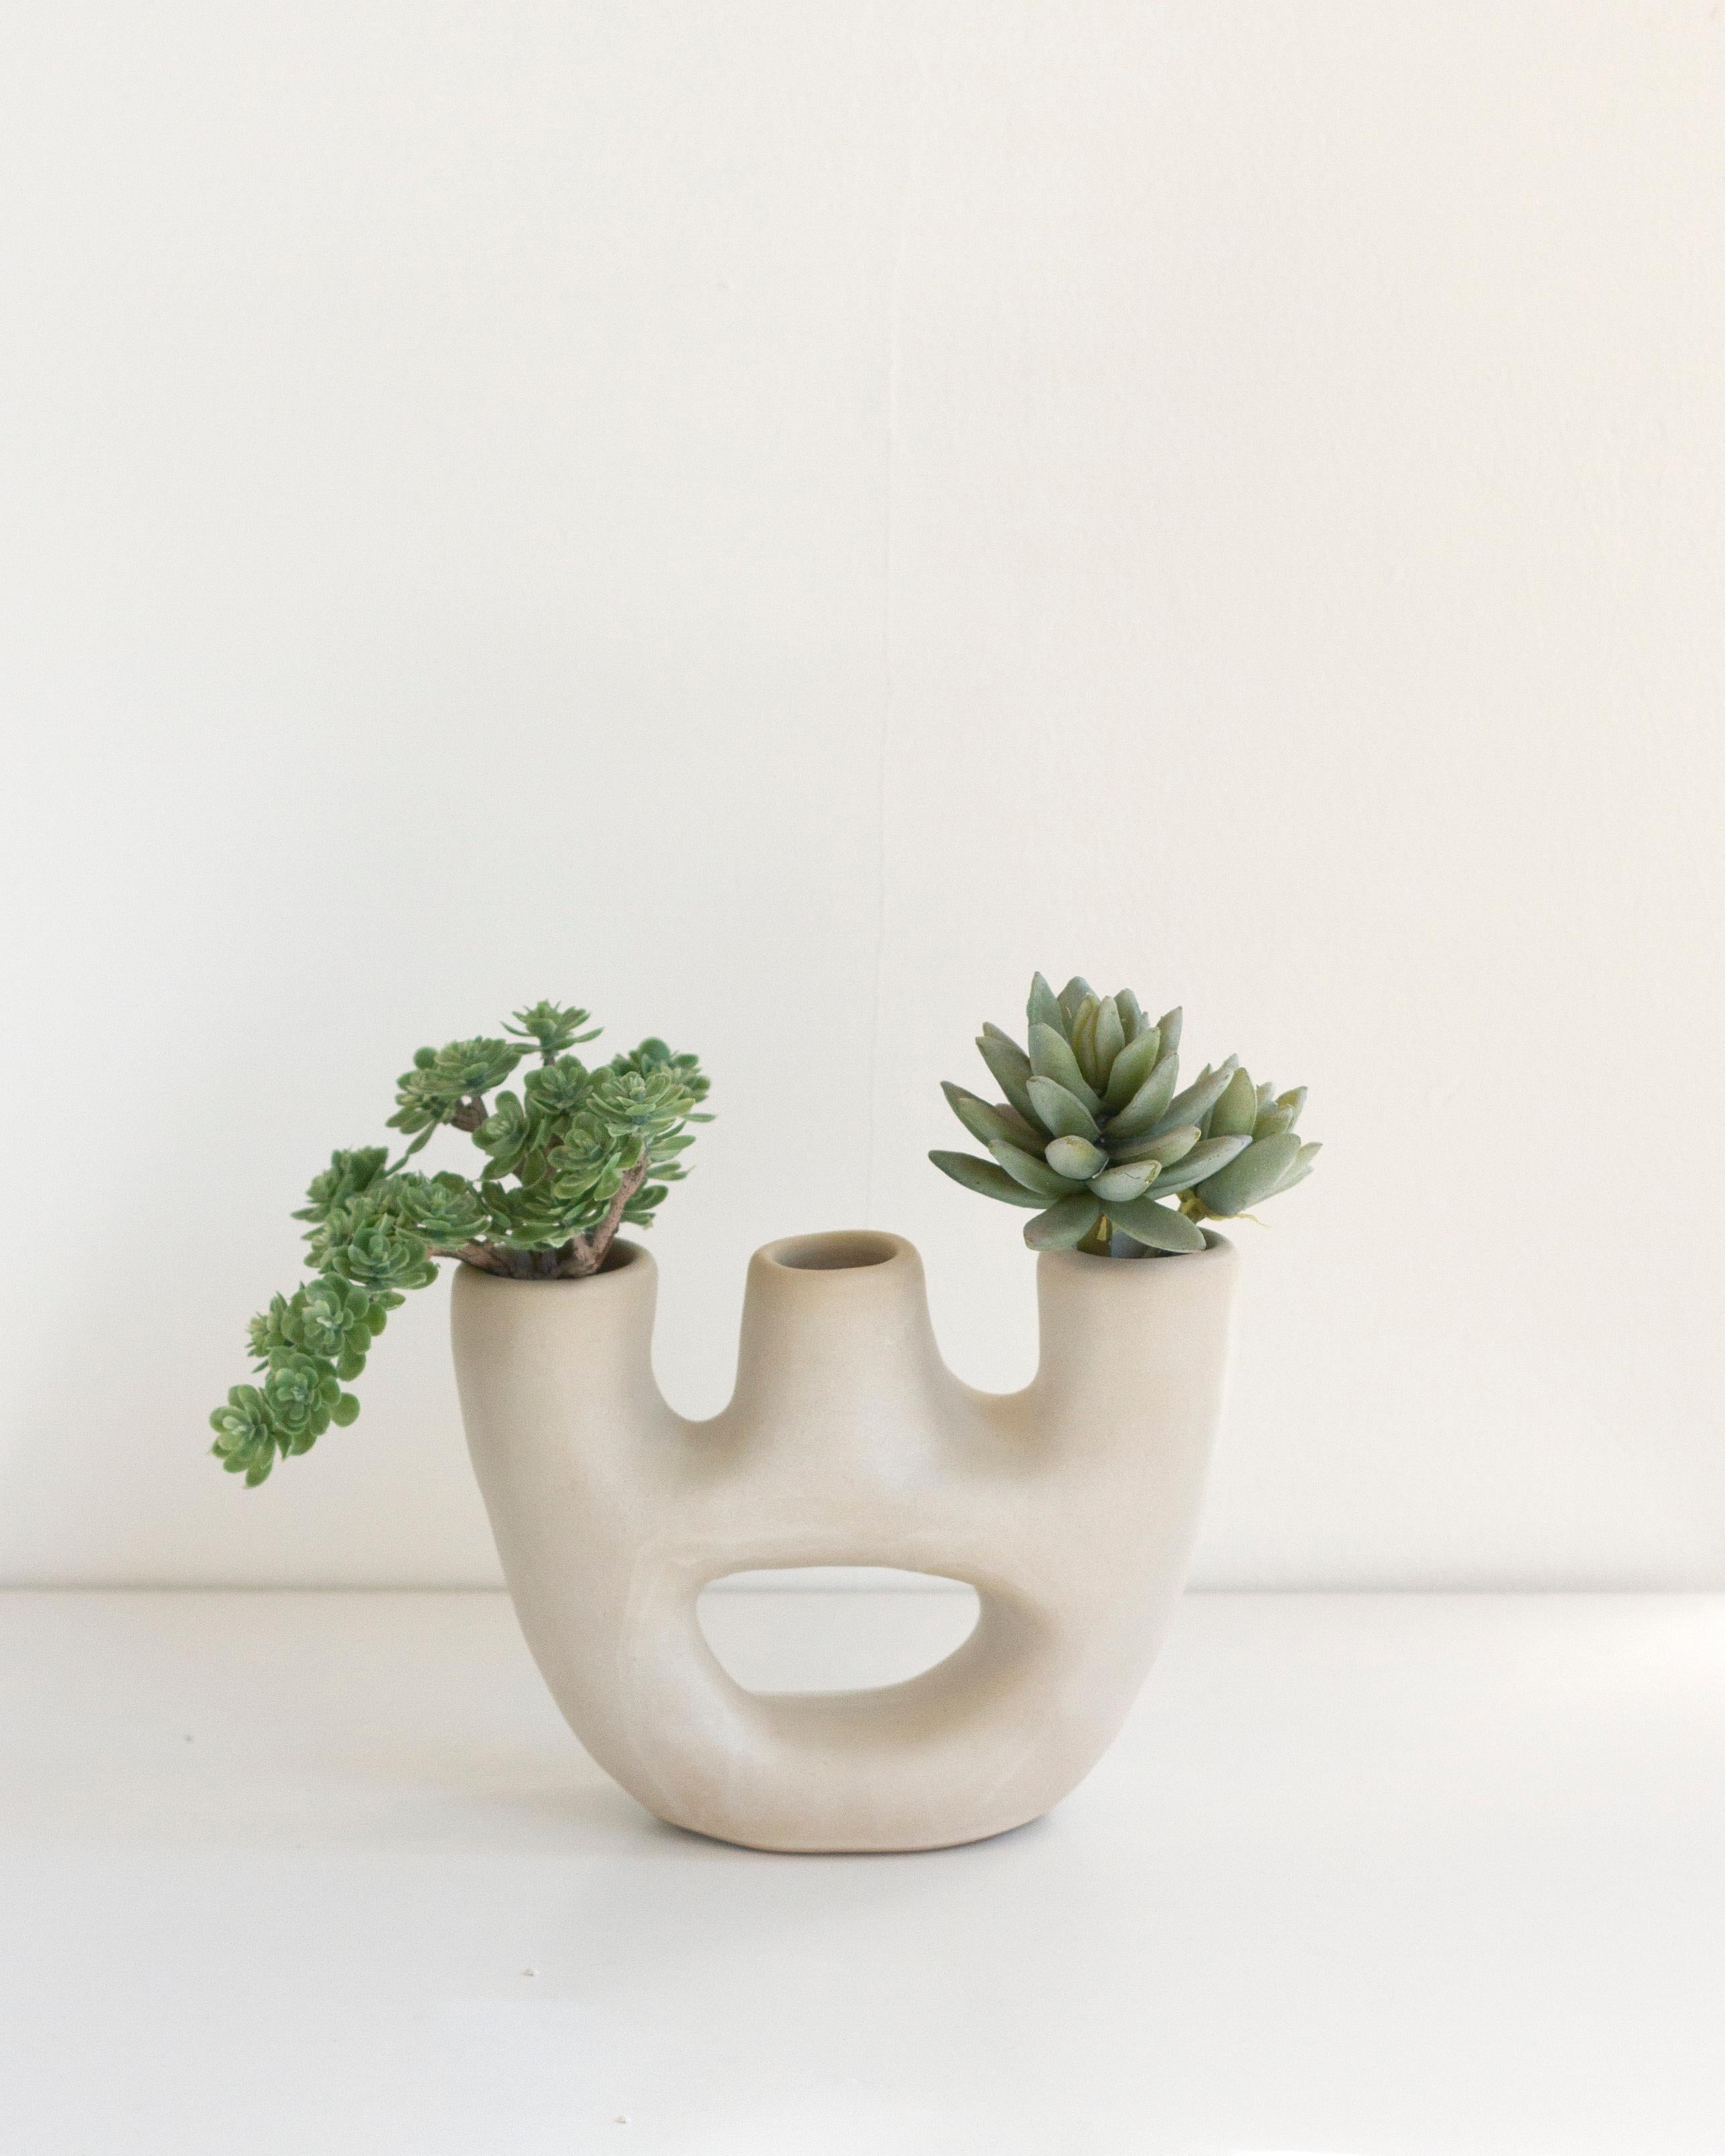 This minimalist handmade vase is made of clay and is perfect for bringing a modern, organic element to your home decor. The design of this vase is inspired by candleholders, with three openings to add a unique touch. Great for design-lovers, this